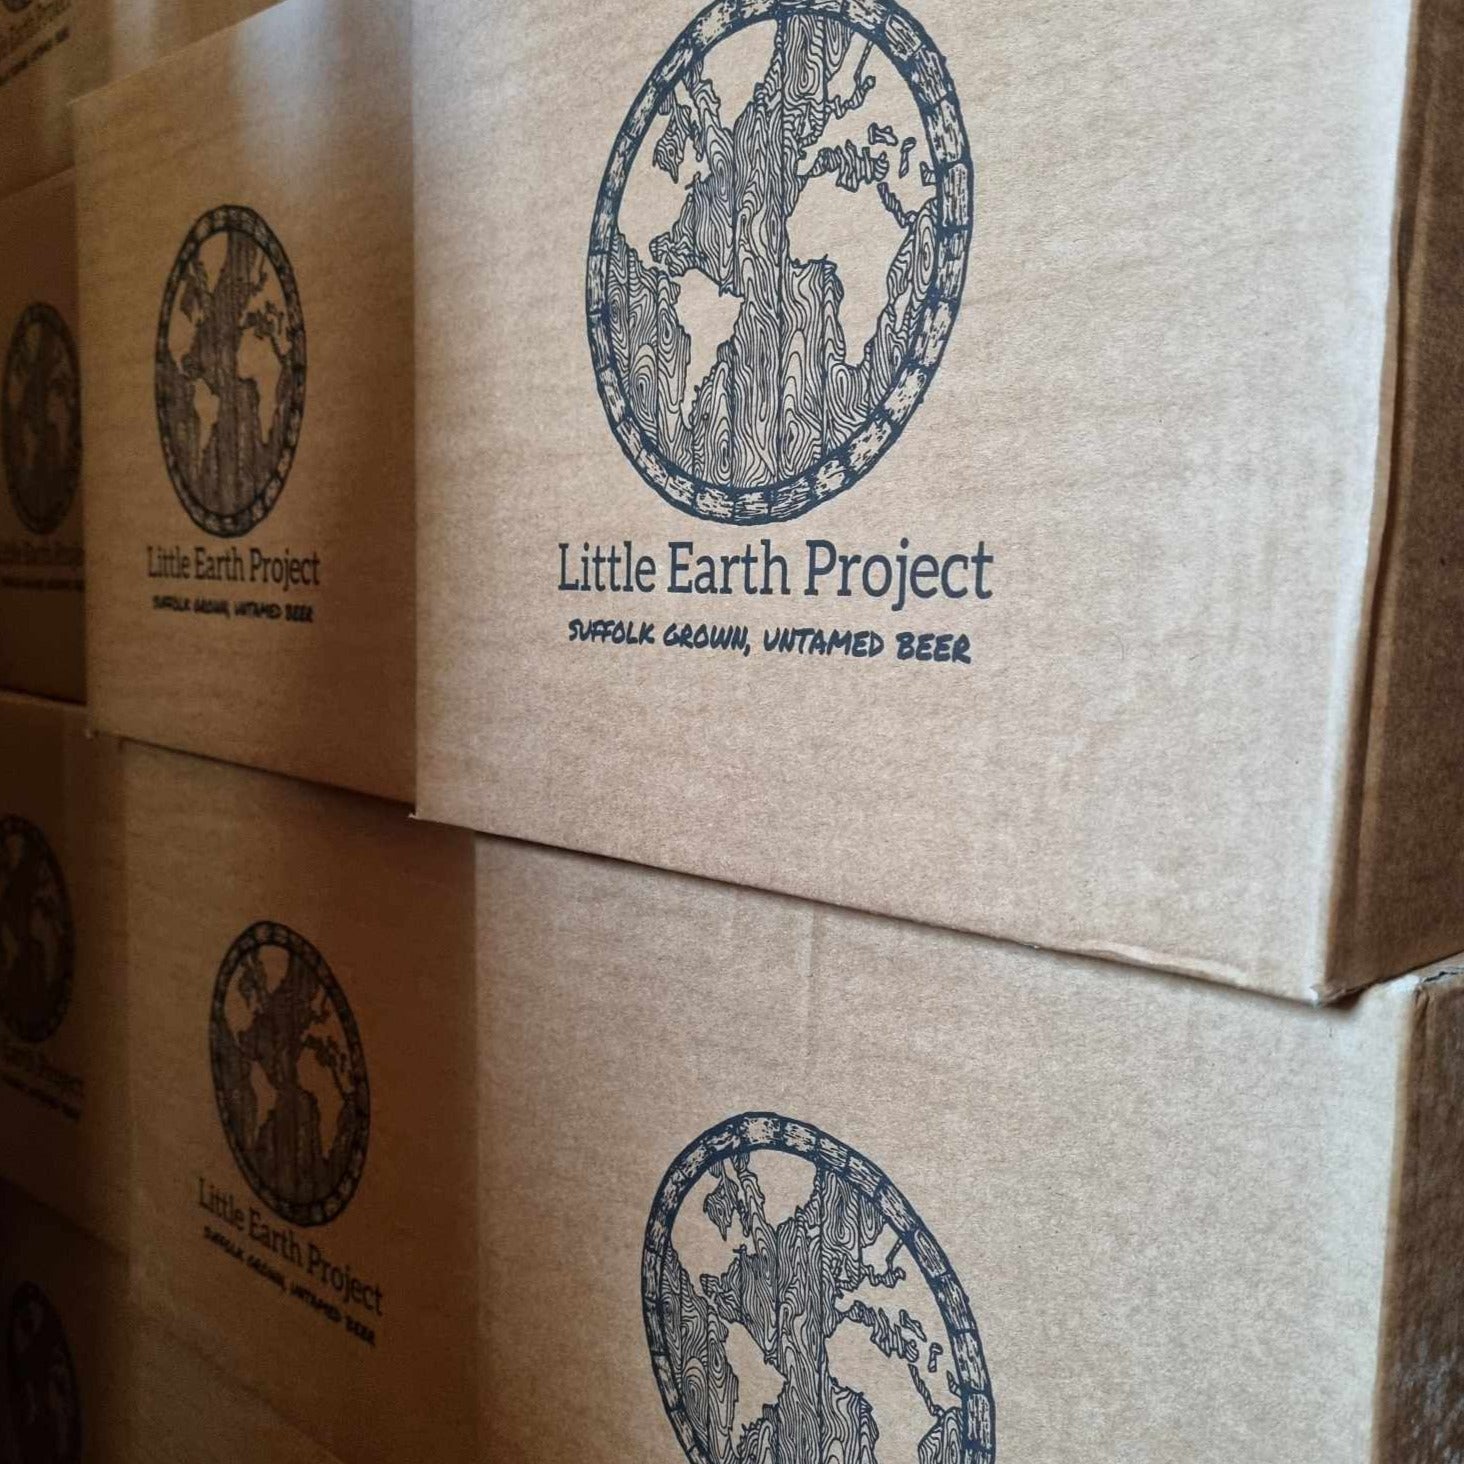 Little Earth Project branded boxes